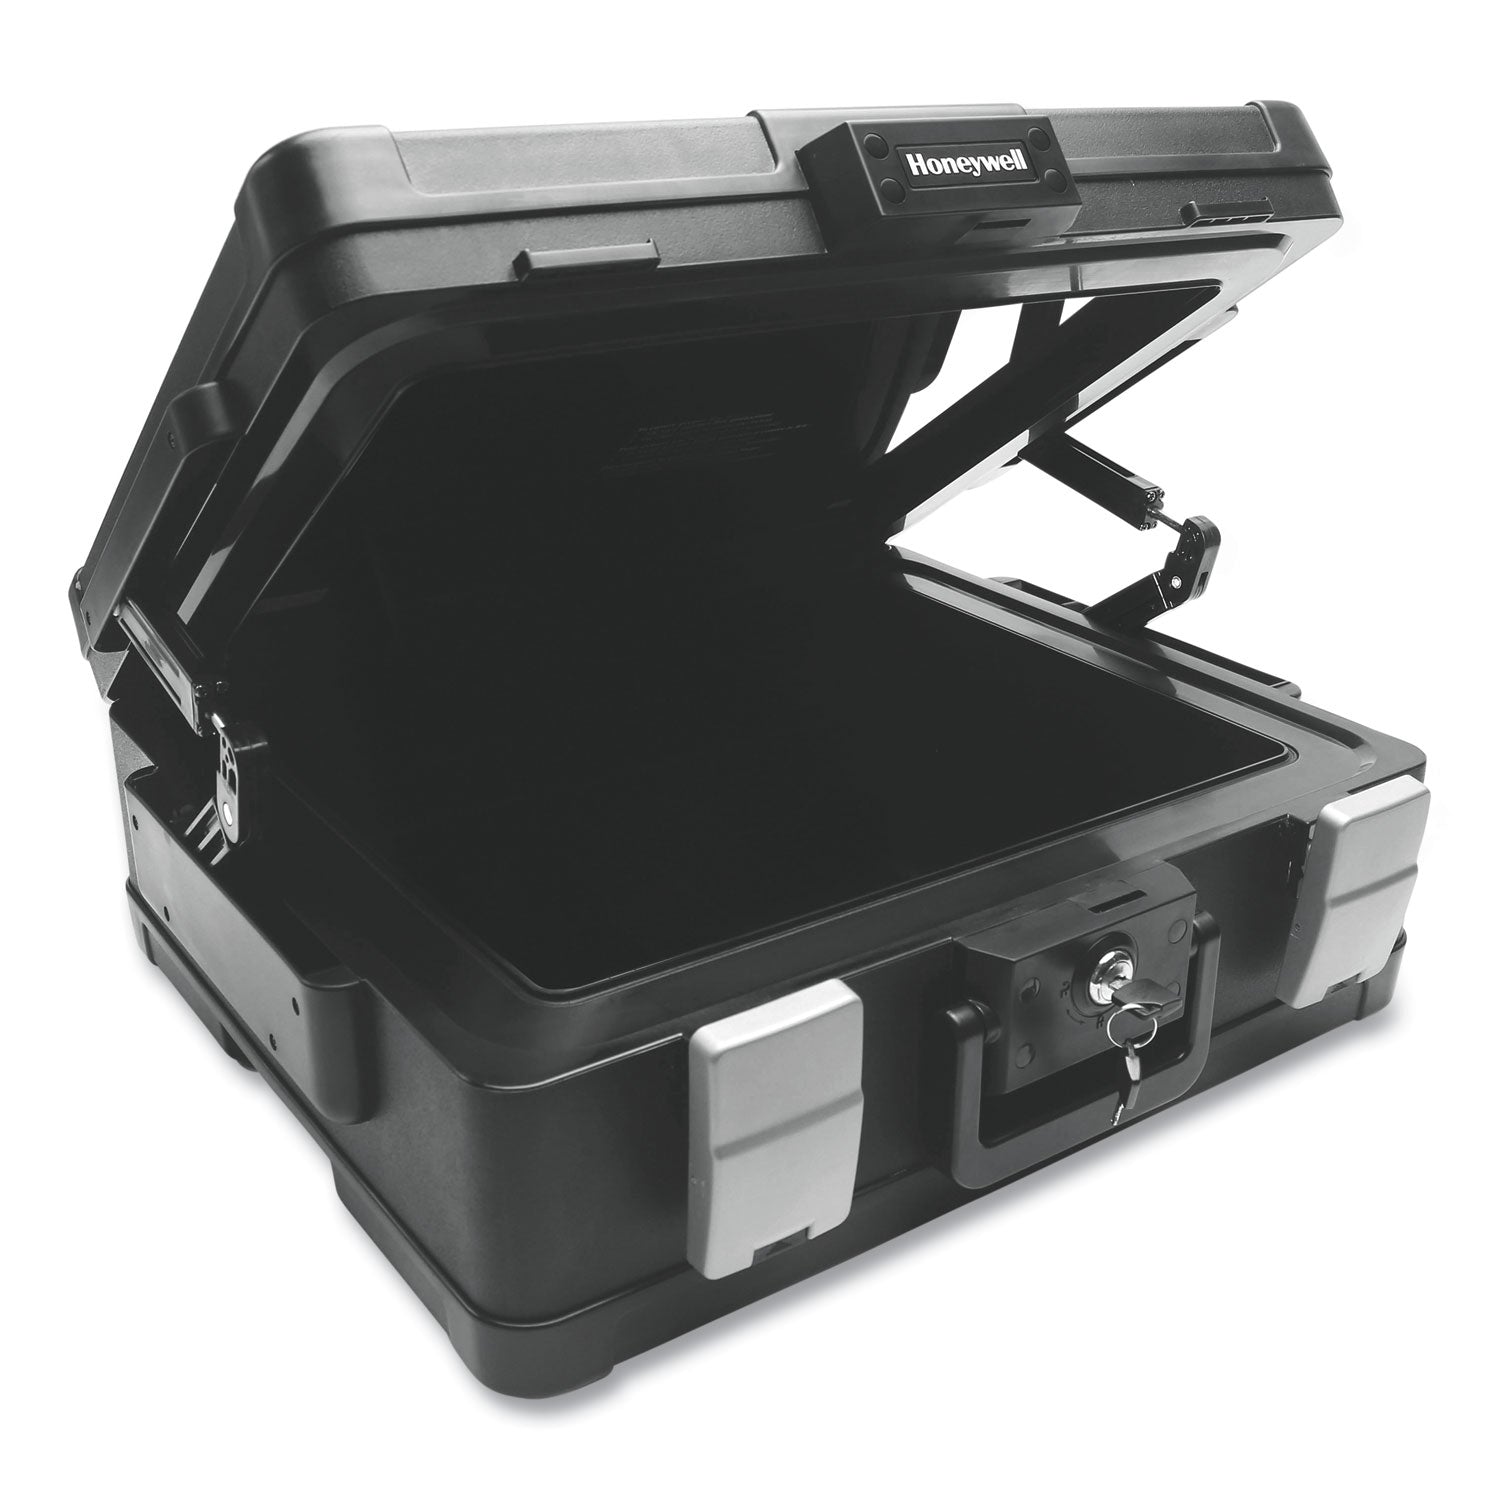 waterproof-and-fireproof-chest-20-x-172-x-73-039-cu-ft-black_hwl1114000 - 2